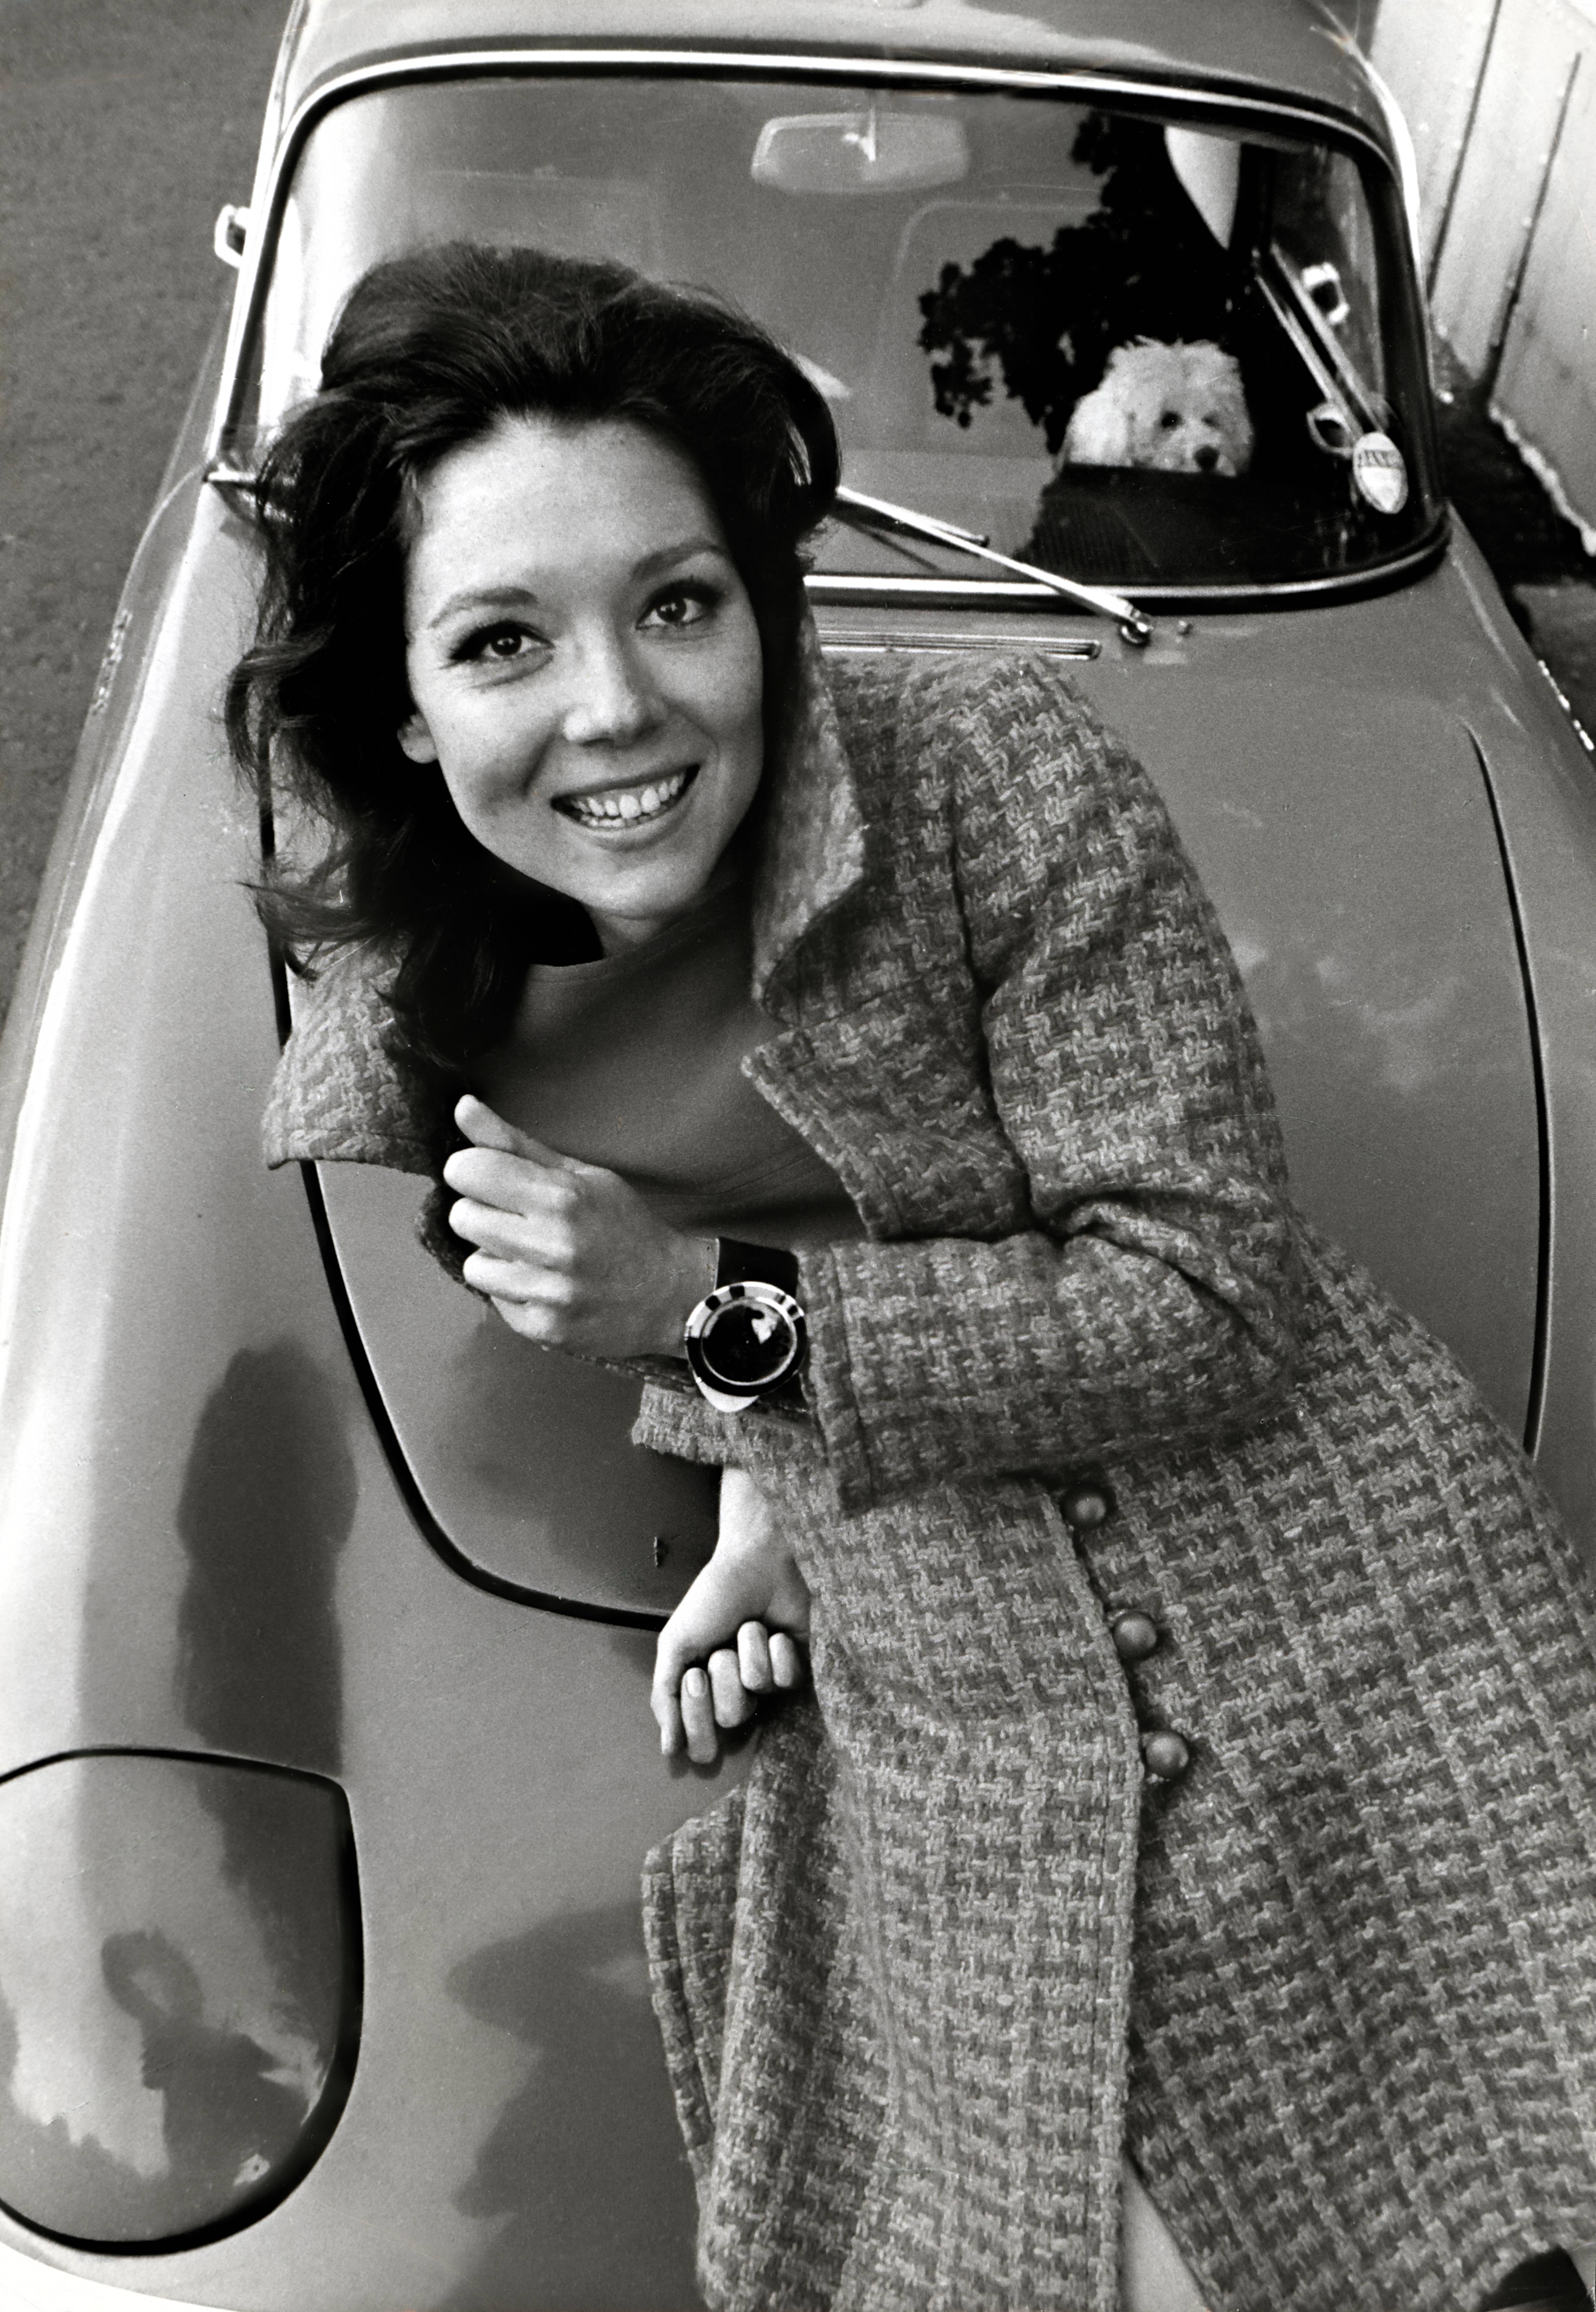 Unknown Black and White Photograph - Diana Rigg as Emma Peels in The Avengers